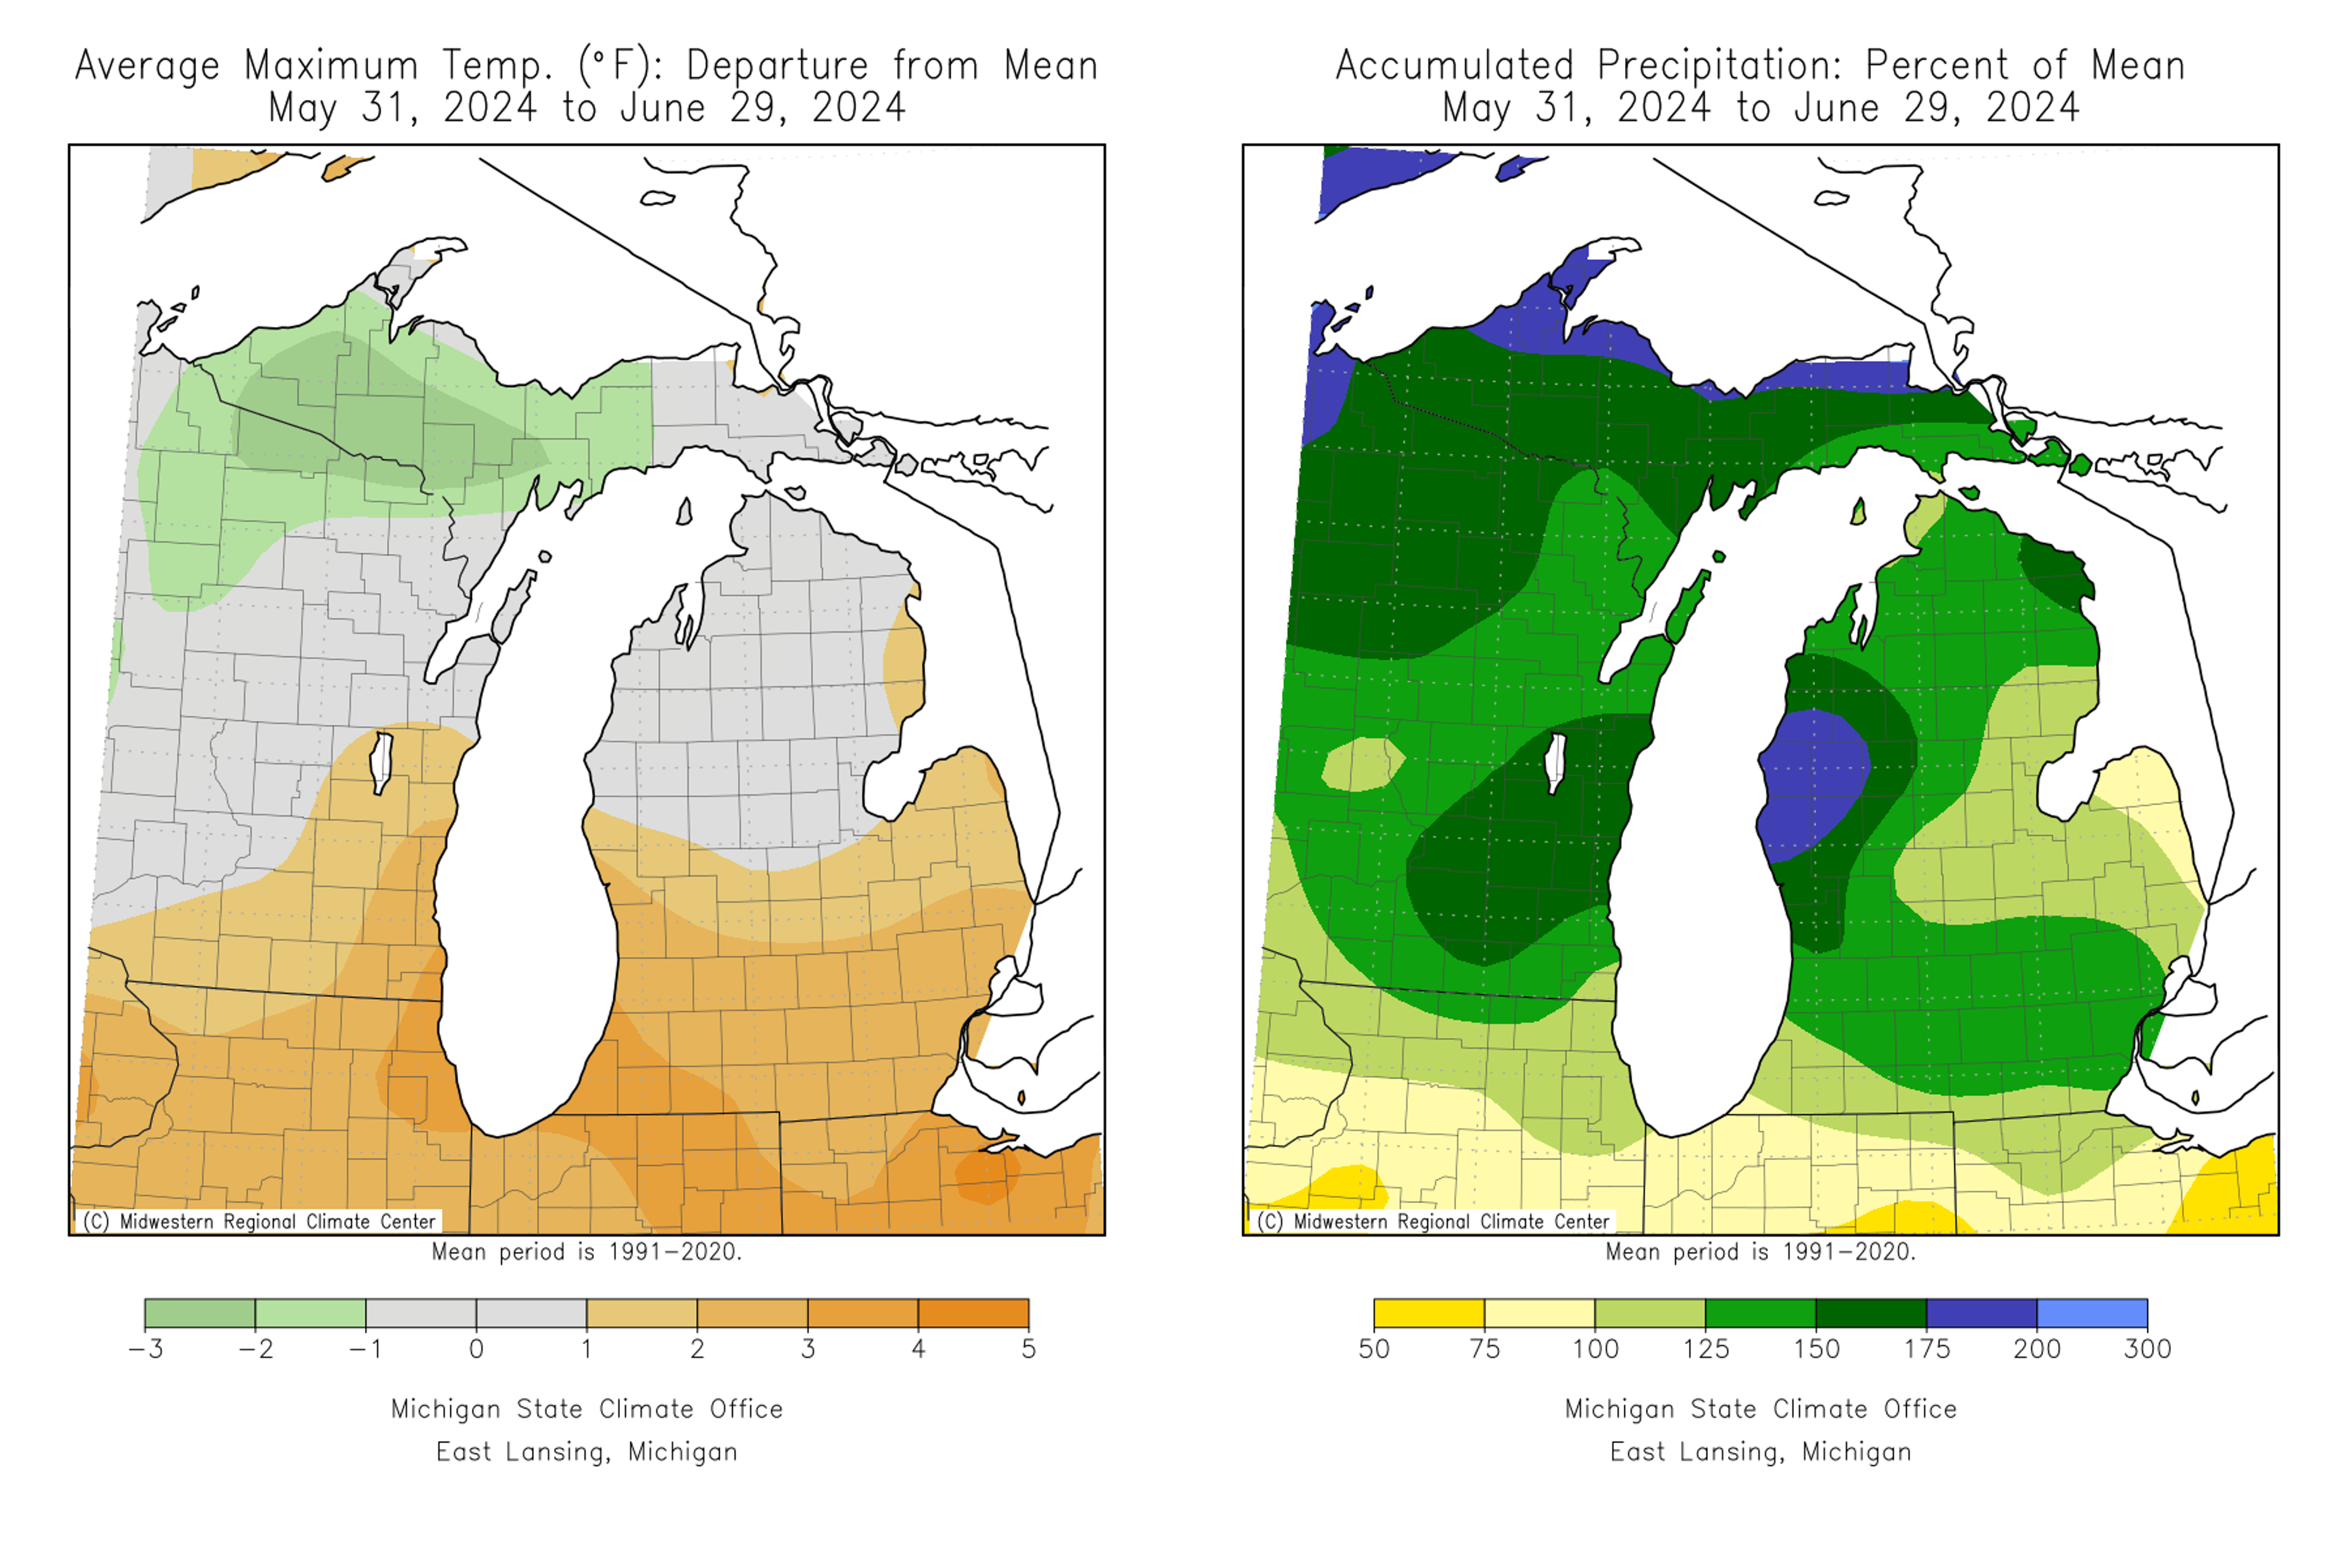 Maps of Michigan showing the 30-day temperature and precipitation departure from mean.